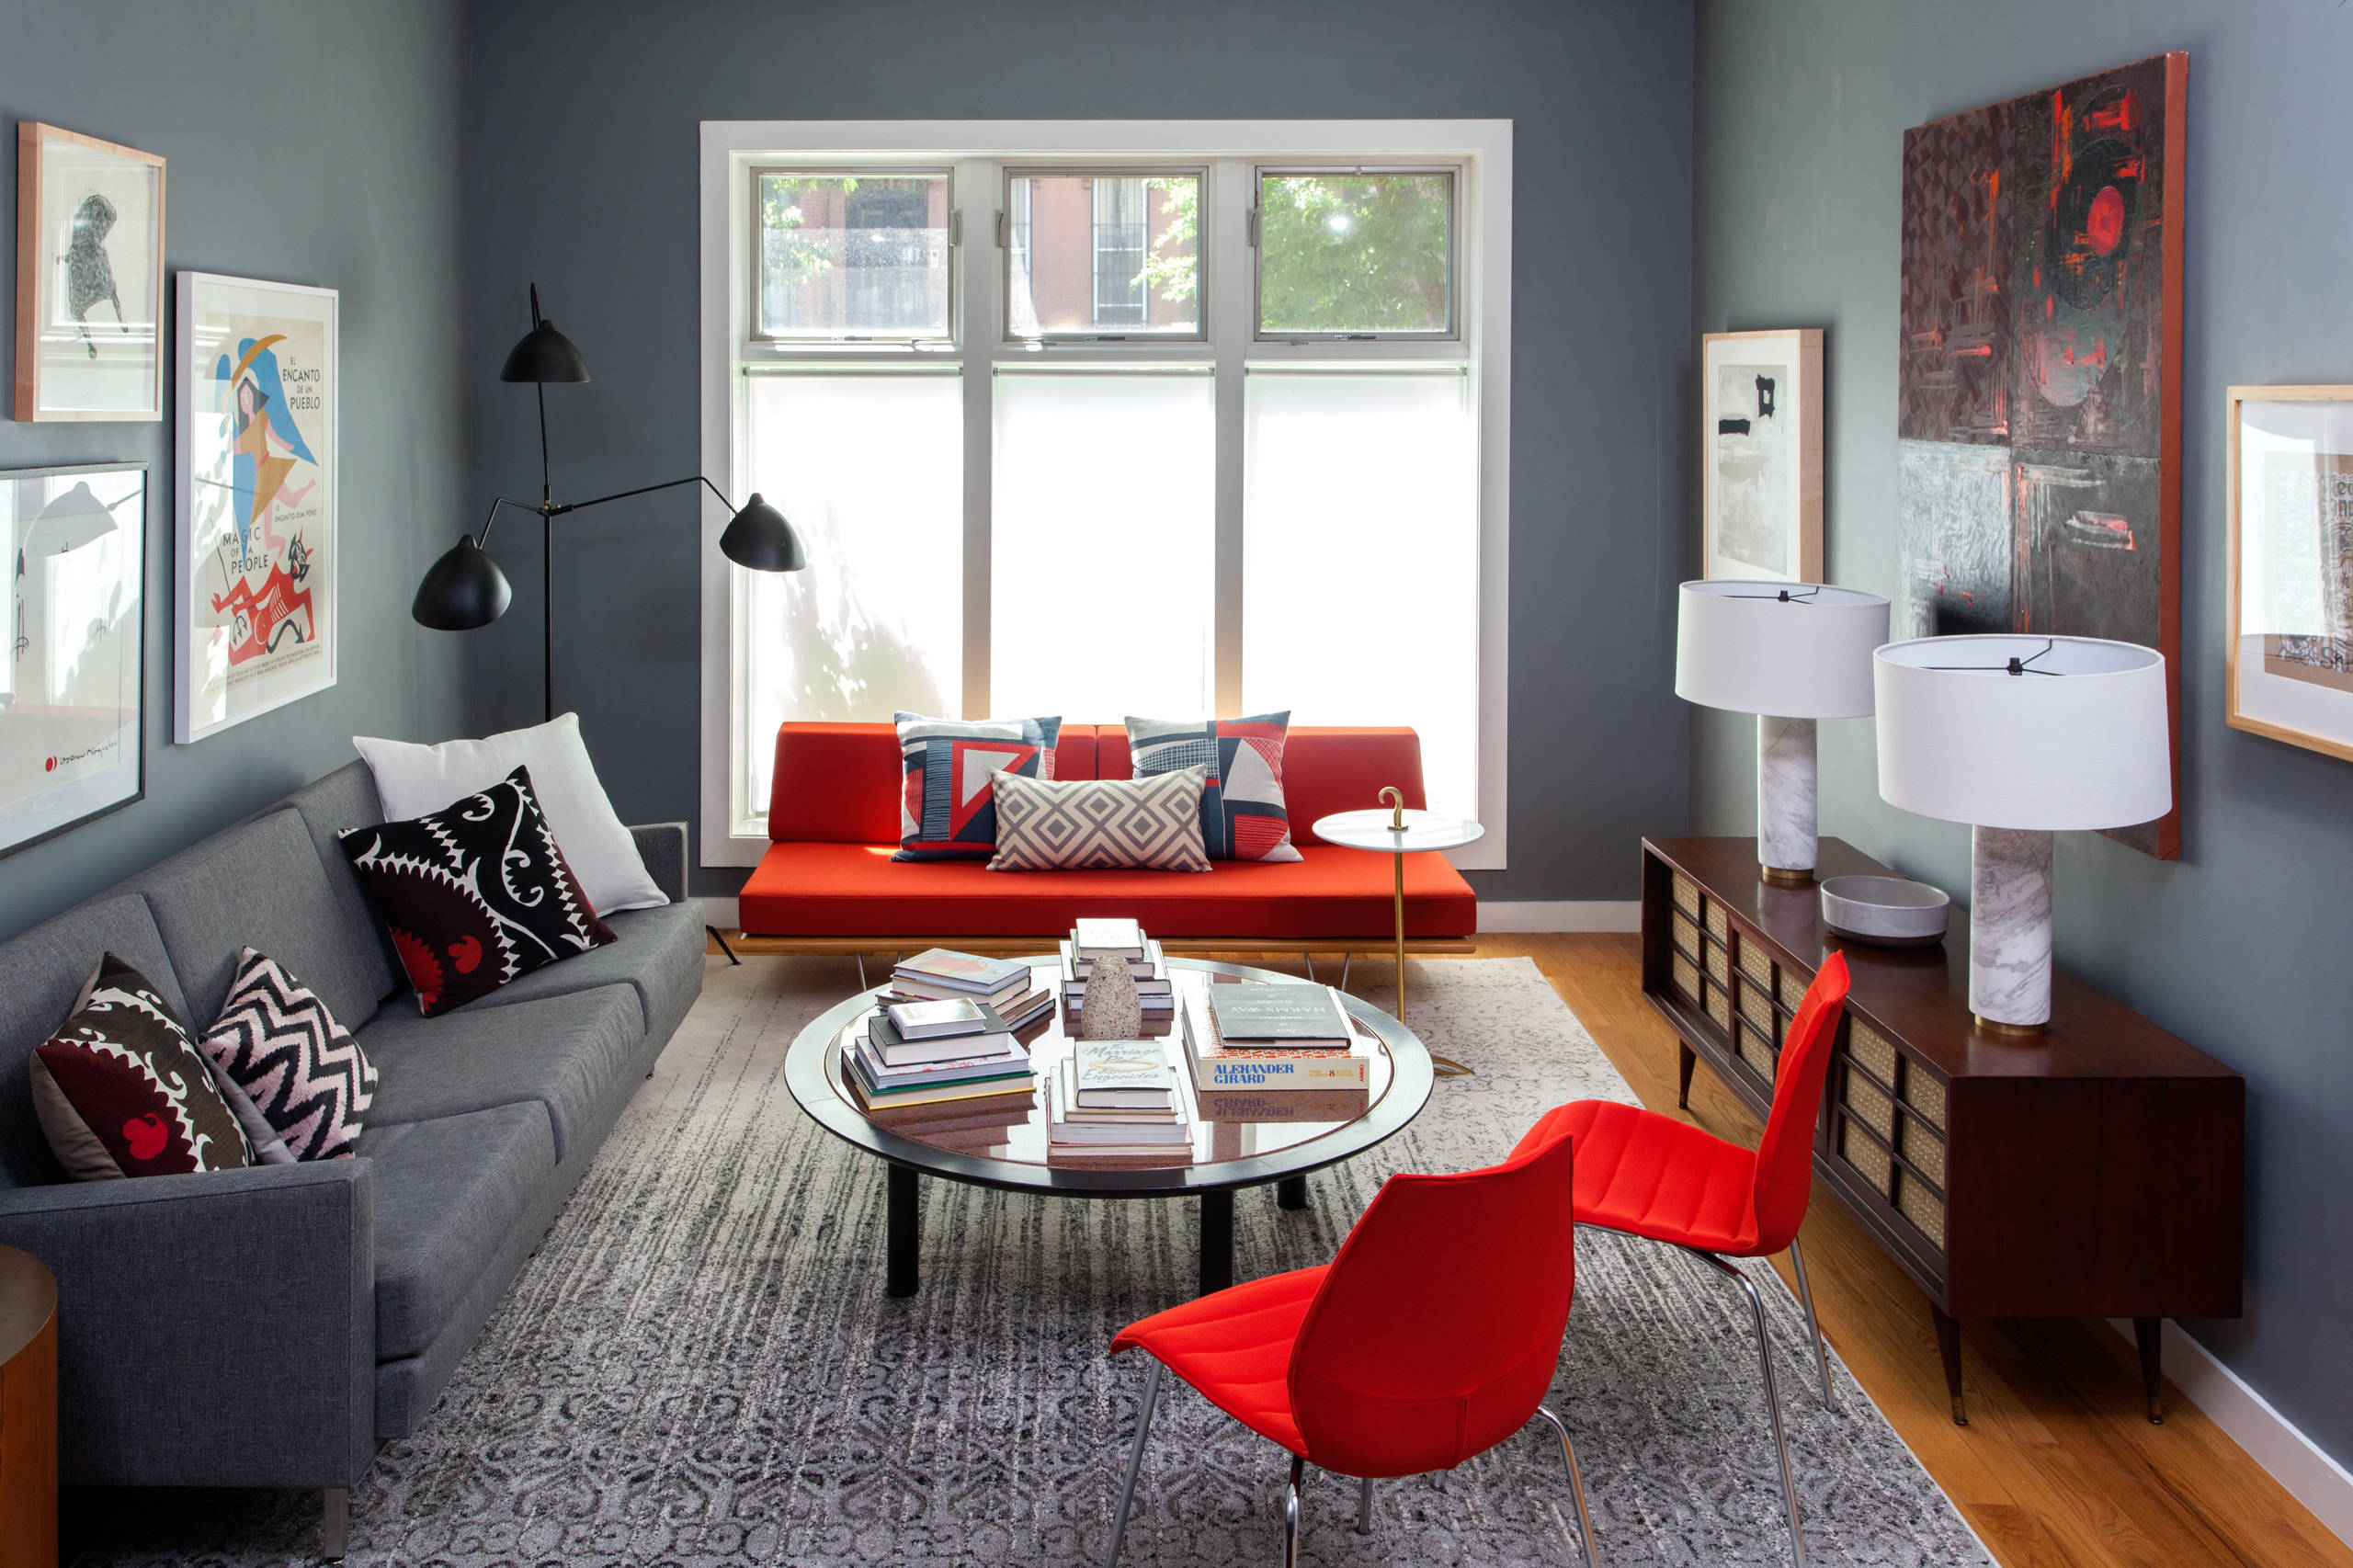 Wall Color With Red Couch - Photos & Ideas | Houzz